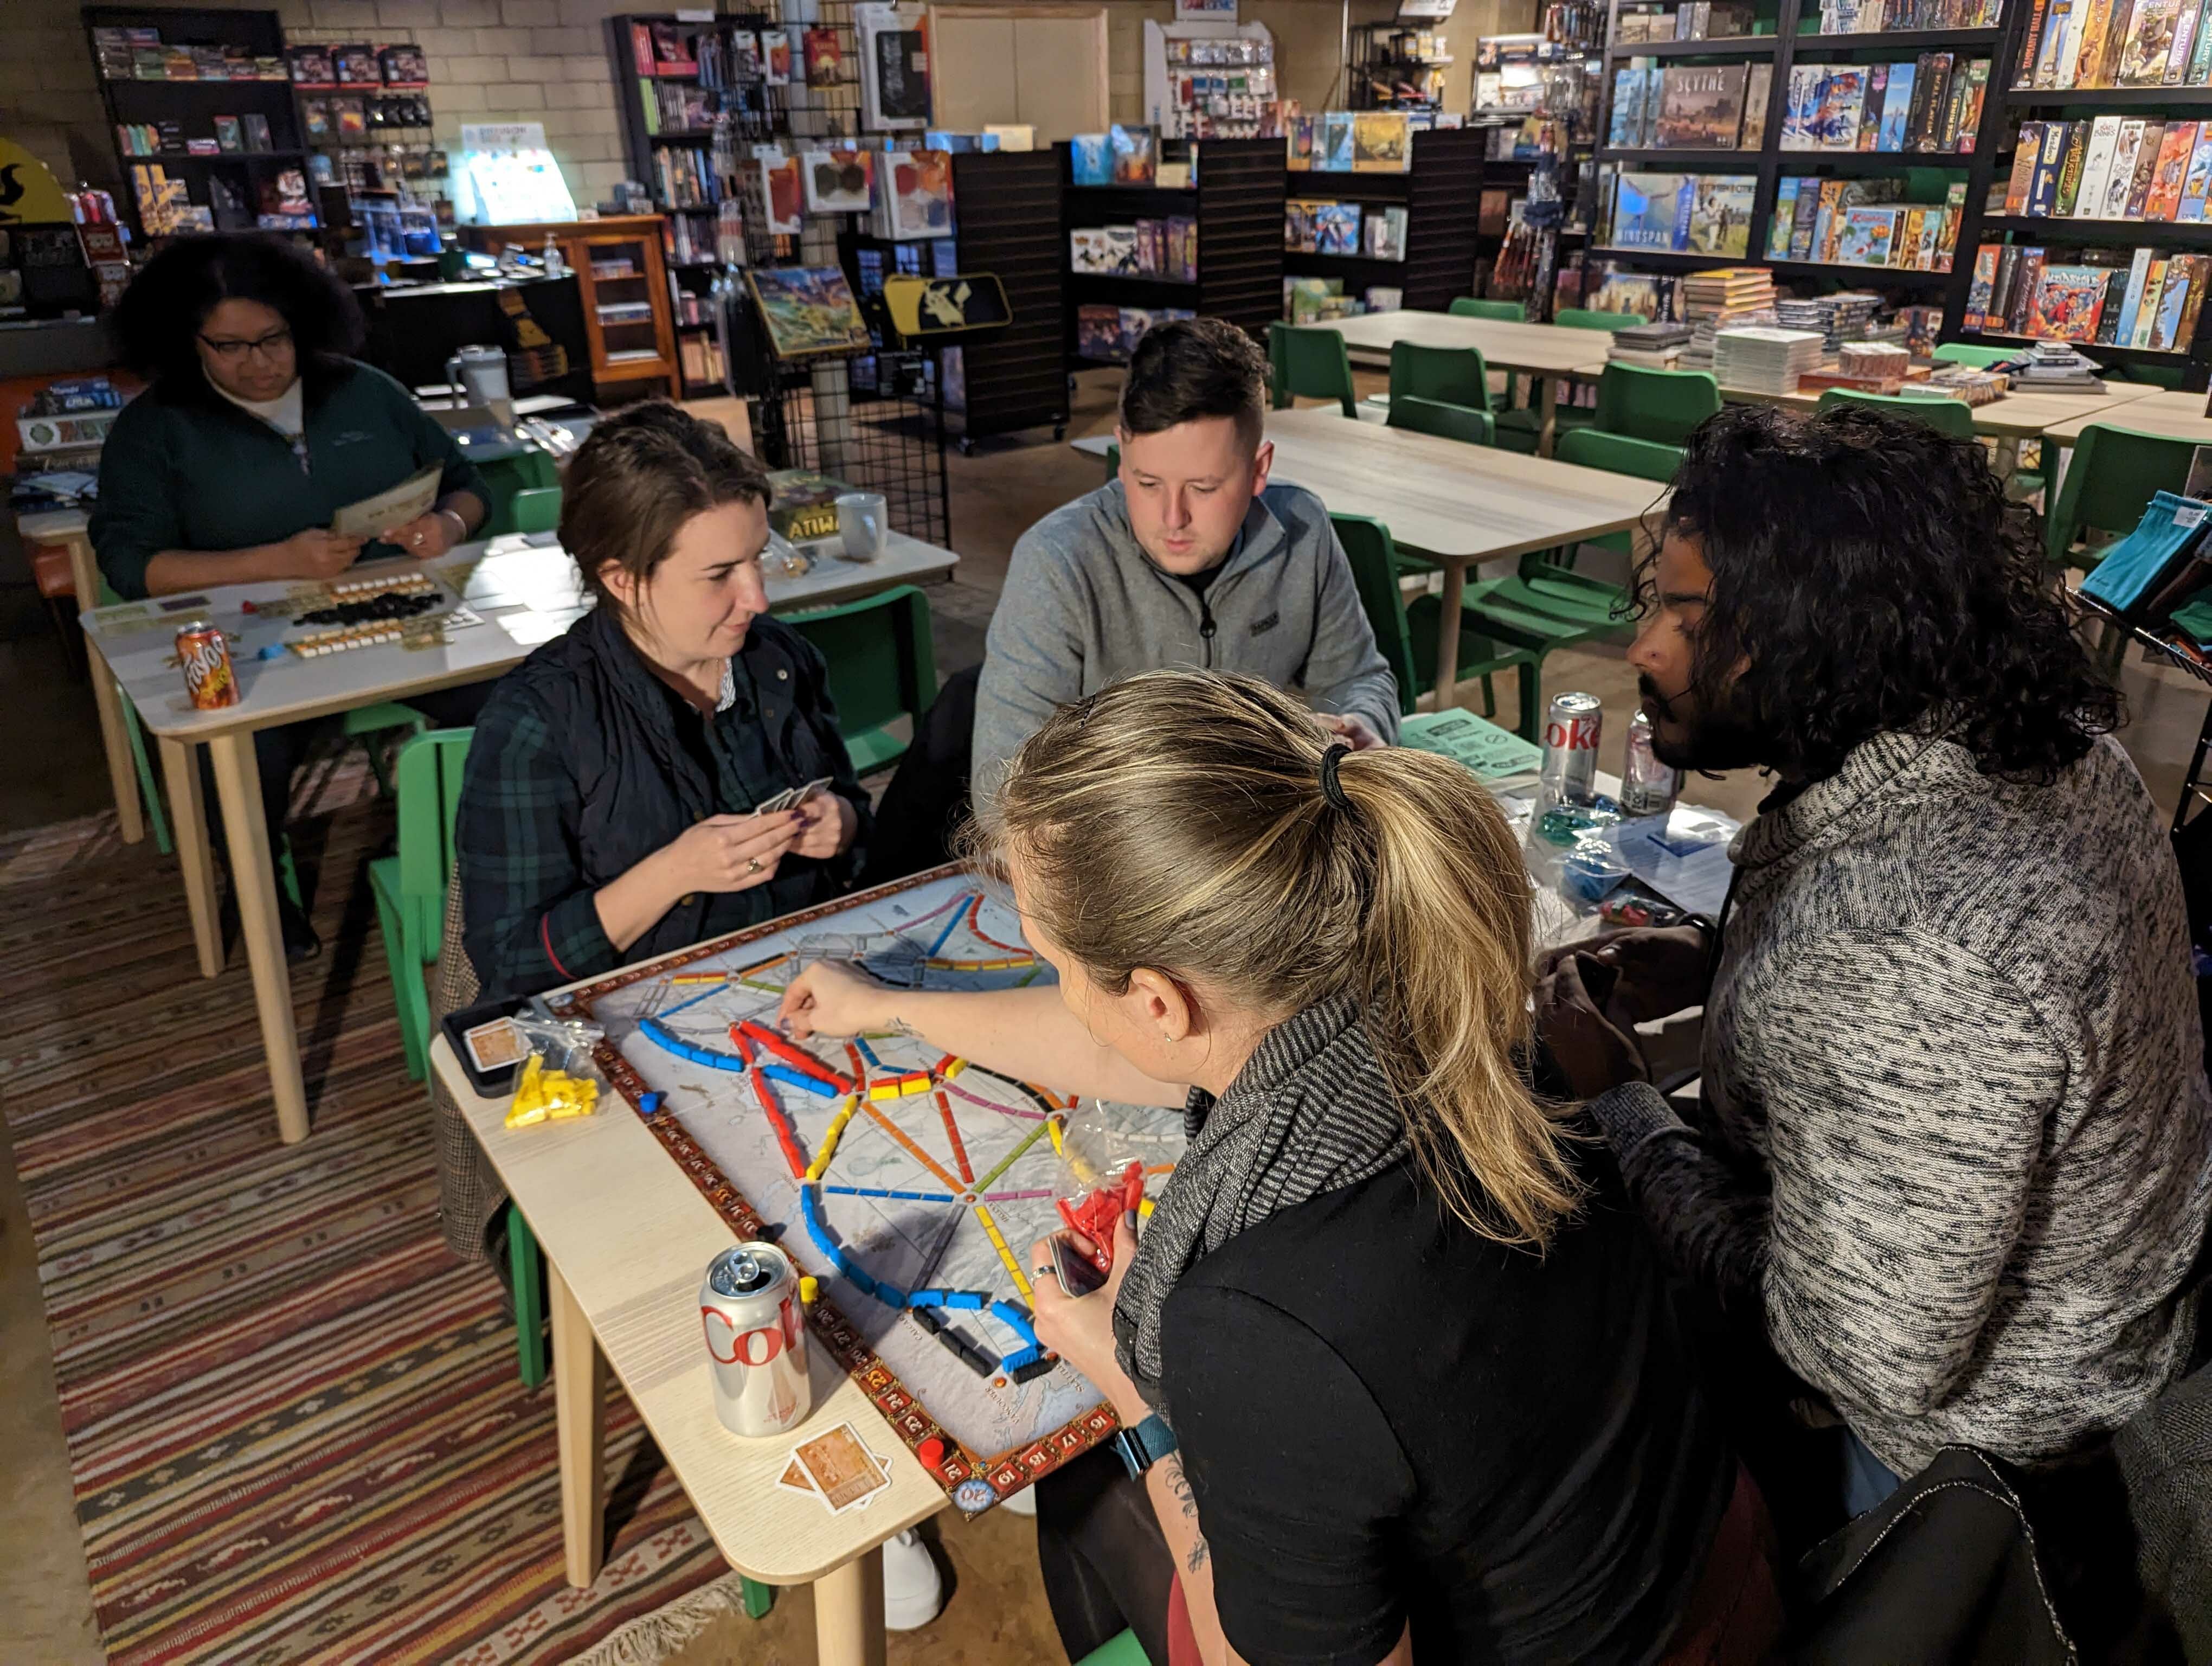 A group plays Ticket to Ride in the Opal Grove Games gaming space. Courtesy photo